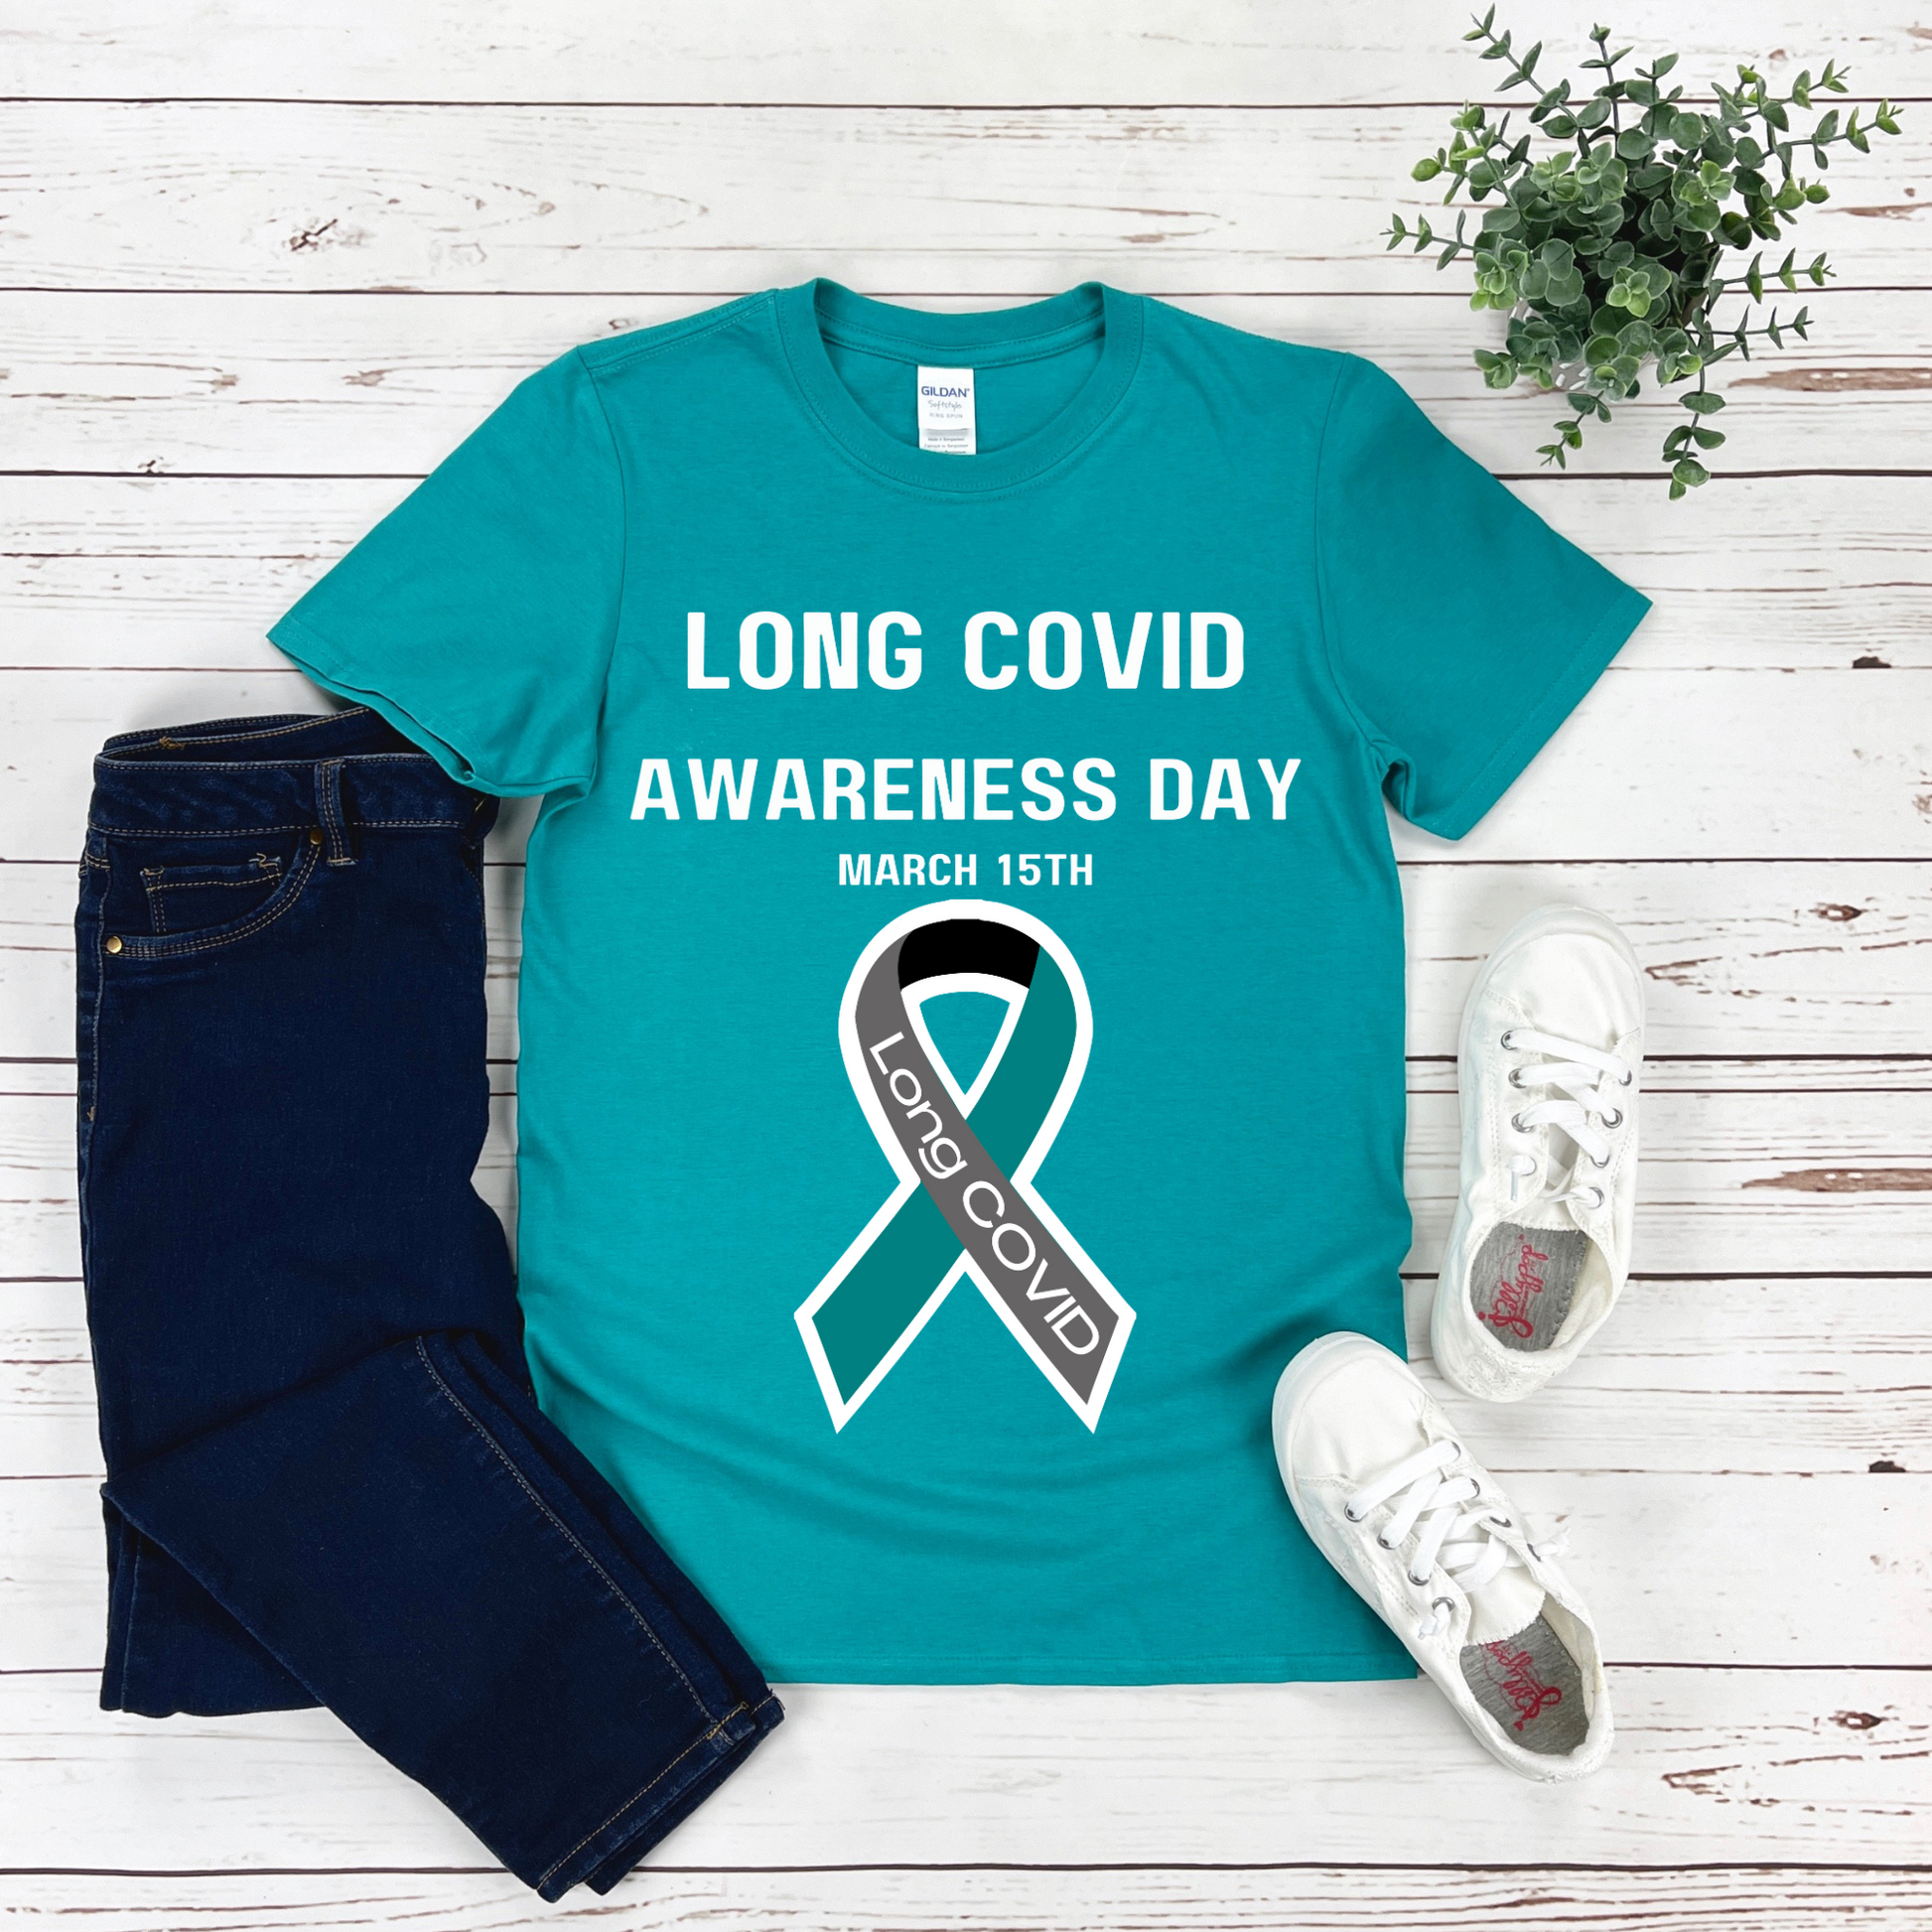 <img alt="teal tee shirt with white text that reads Long Covid Awareness Day, March 15th and a long COVID ribbon in teal gray white and bl" src="#" />